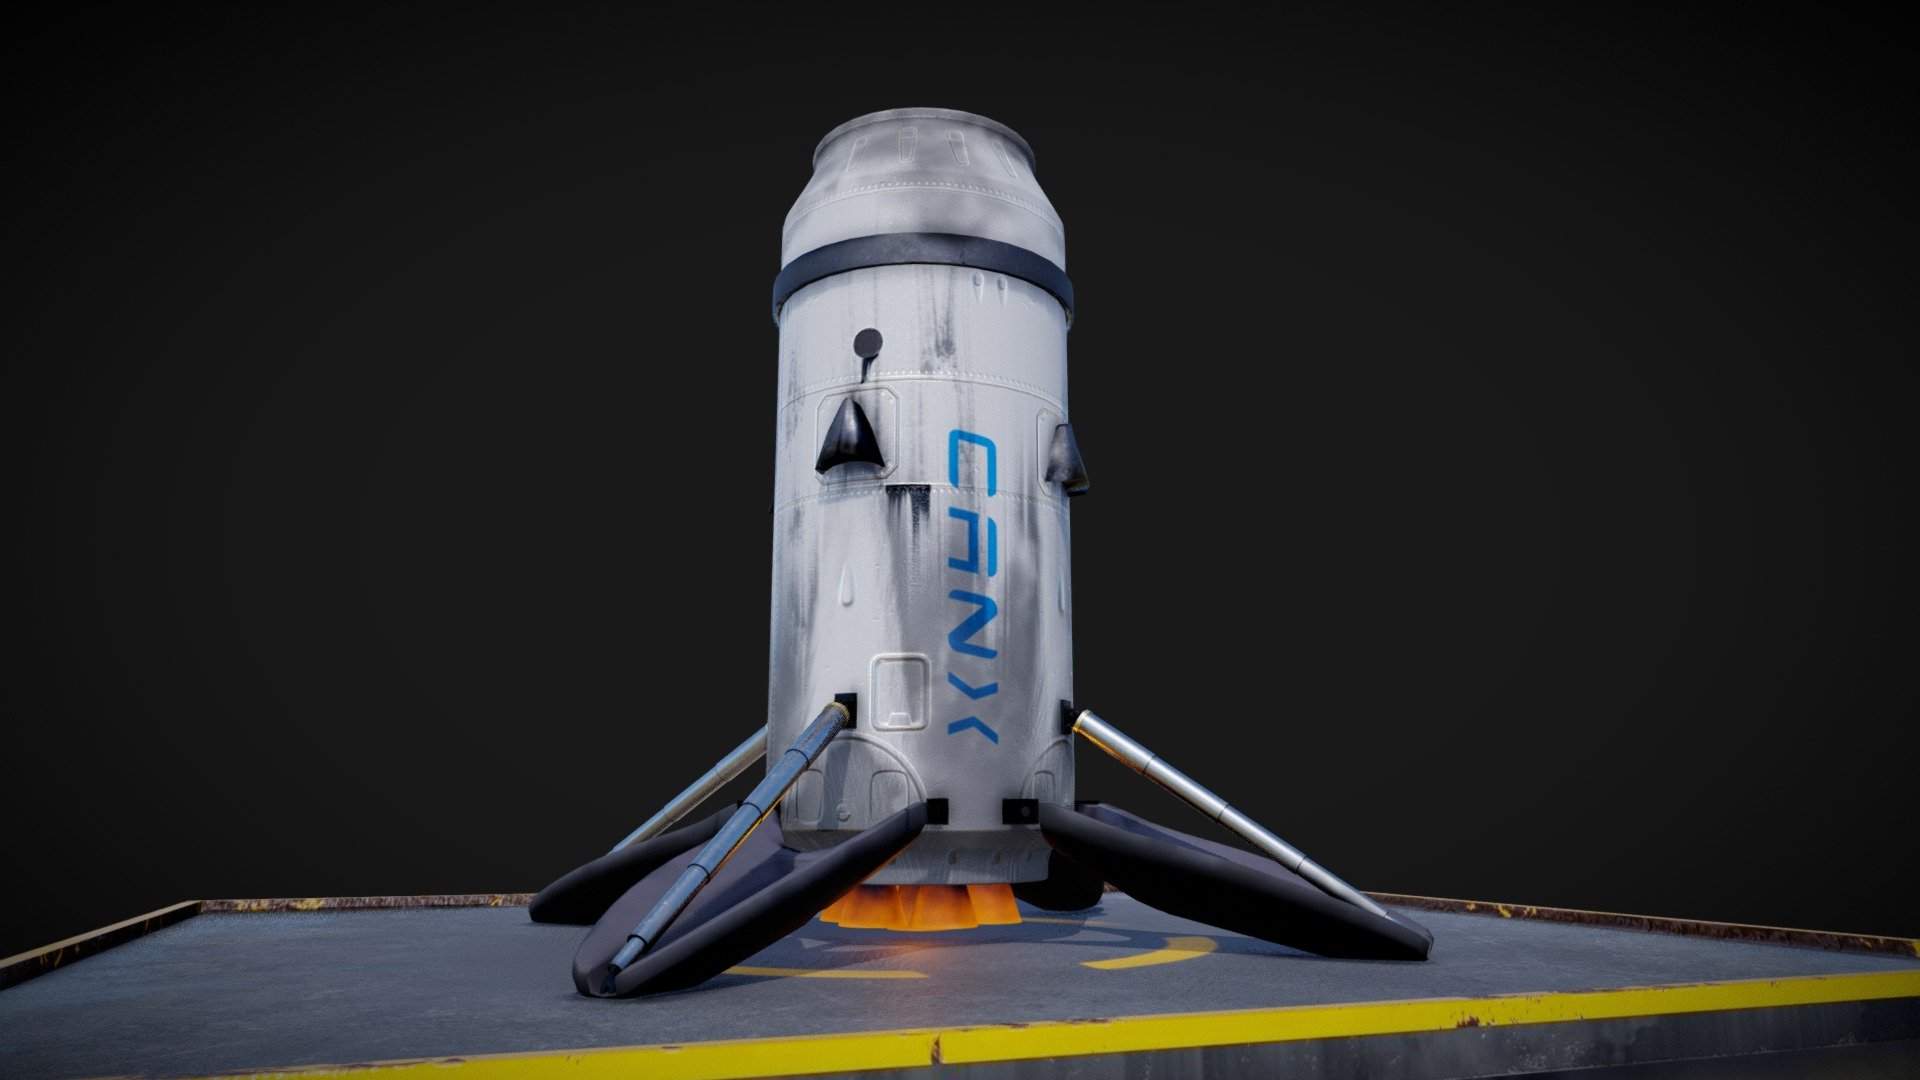 My first Sketchfab challenge and my first attempt at substance painter. Based off of the Space X rocket craft here is my fun take on a &lsquo;drink can'. 

Based on &ldquo;Can